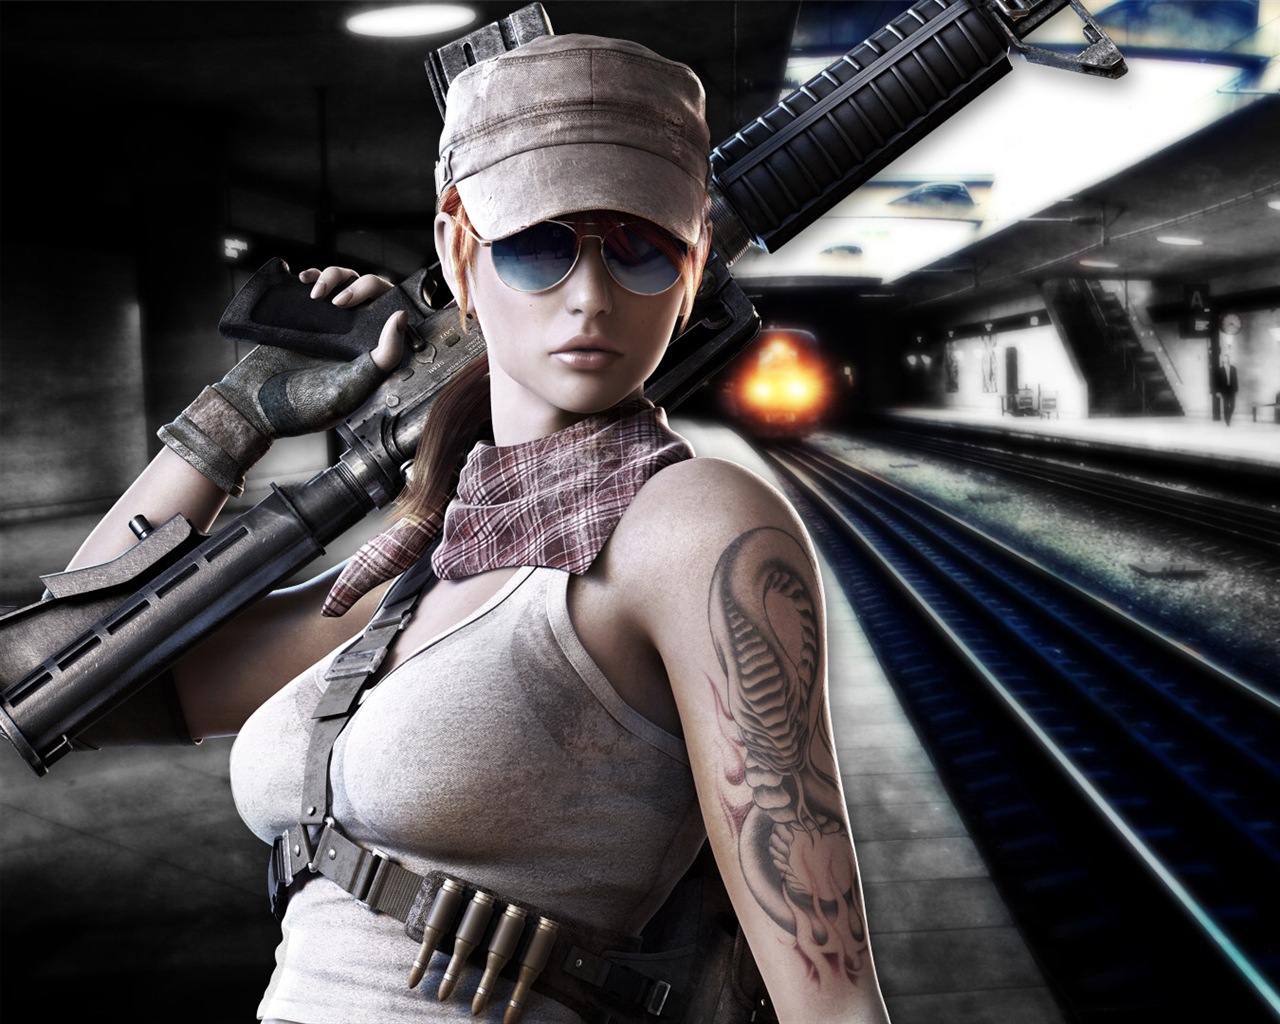 Point Blank HD game wallpapers #7 - 1280x1024